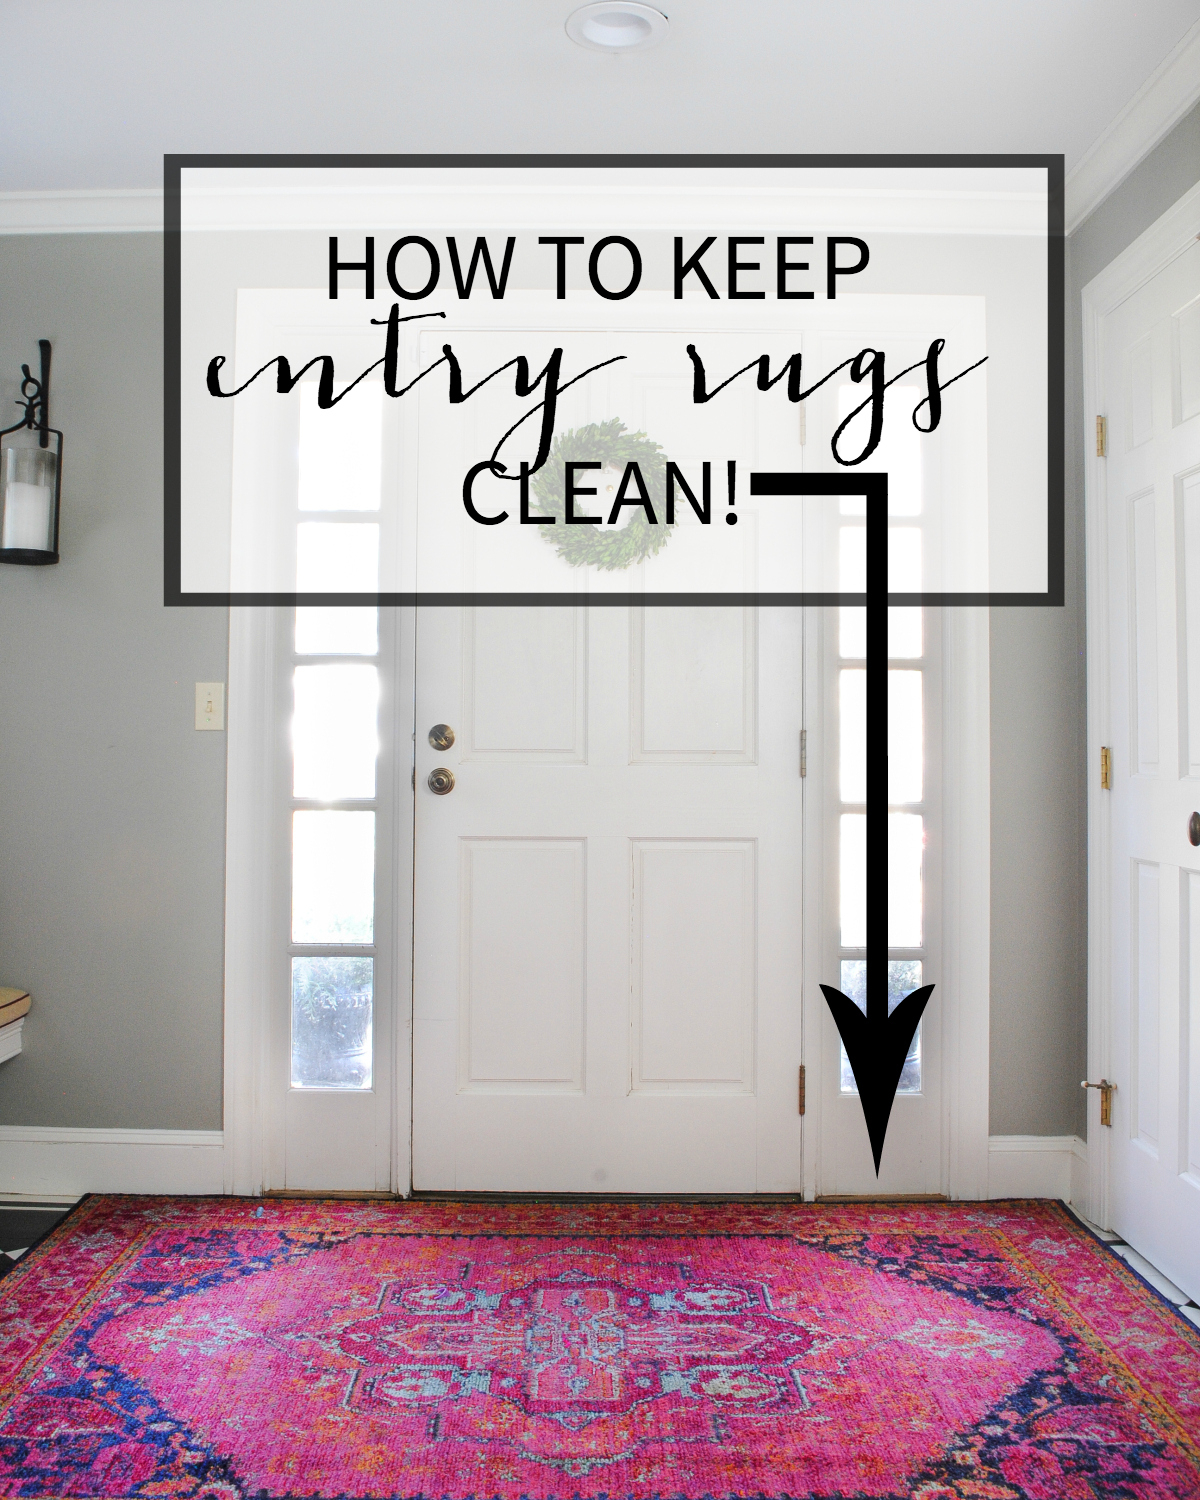 https://www.thechroniclesofhome.com/wp-content/uploads/2017/07/how-to-keep-entry-rugs-clean-1200x1500.jpg